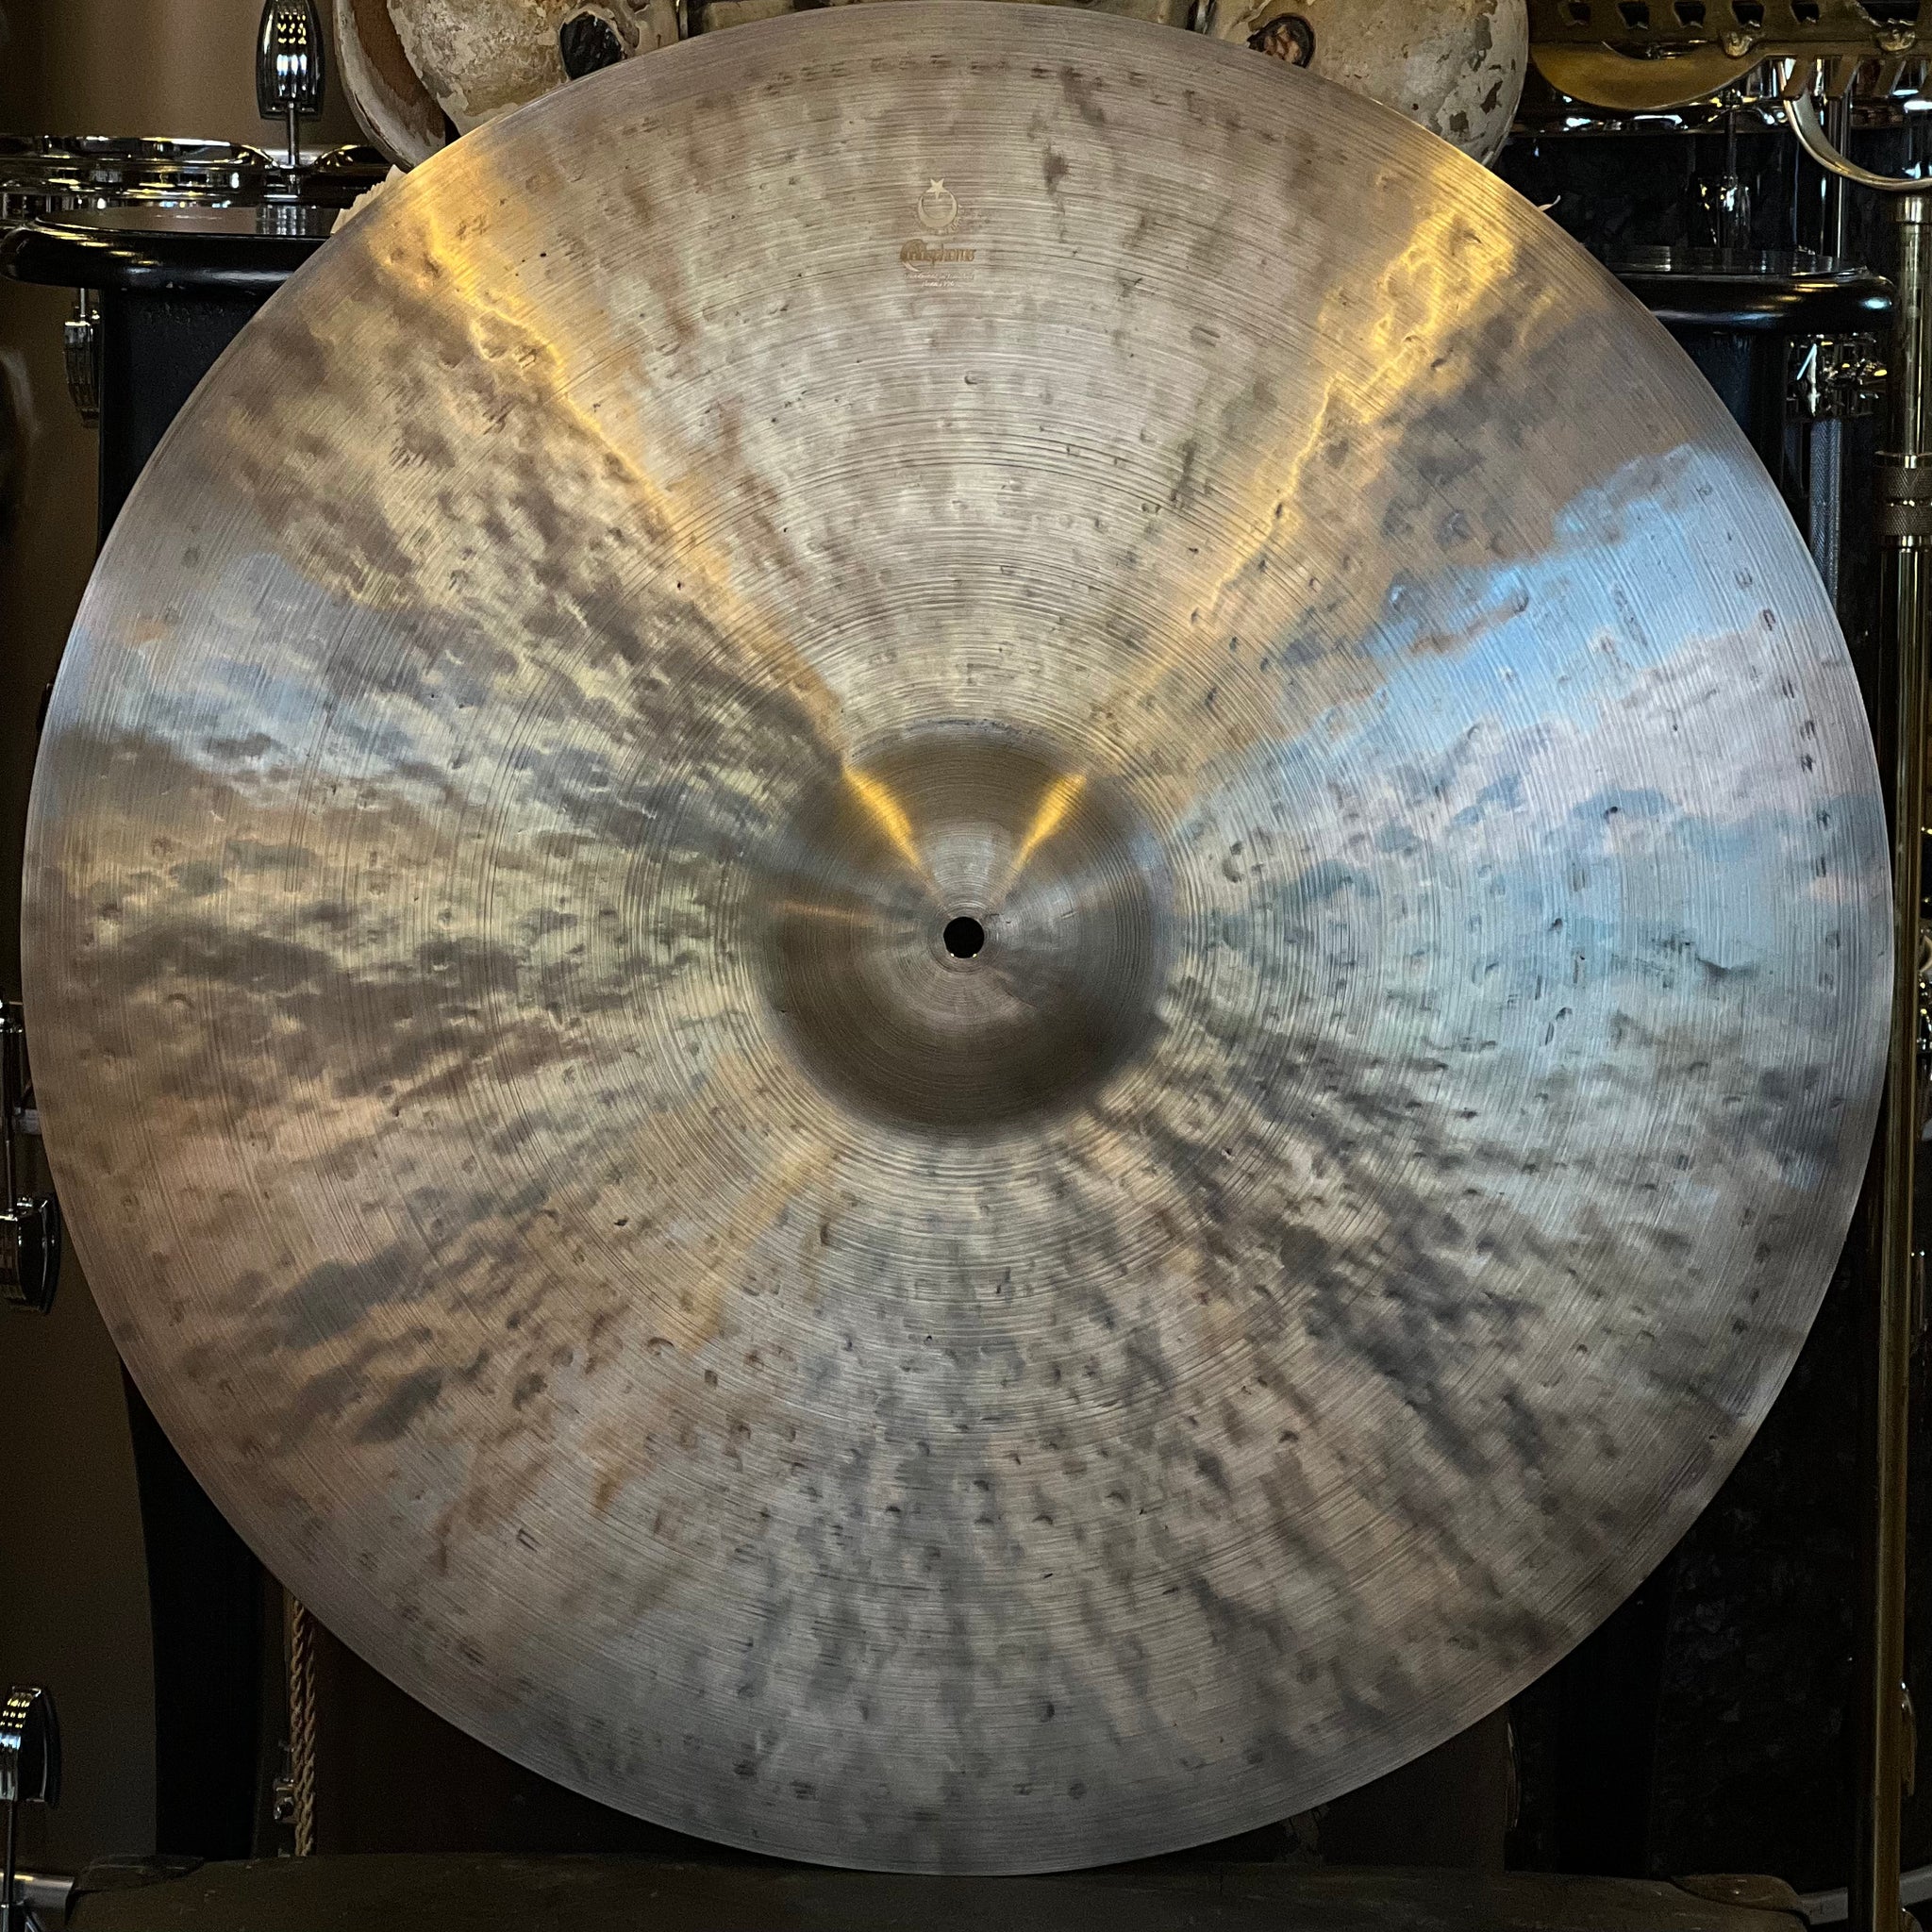 NEW Bosphorus 24" K. Old Stamp Tribute Ride Cymbal - 2220g